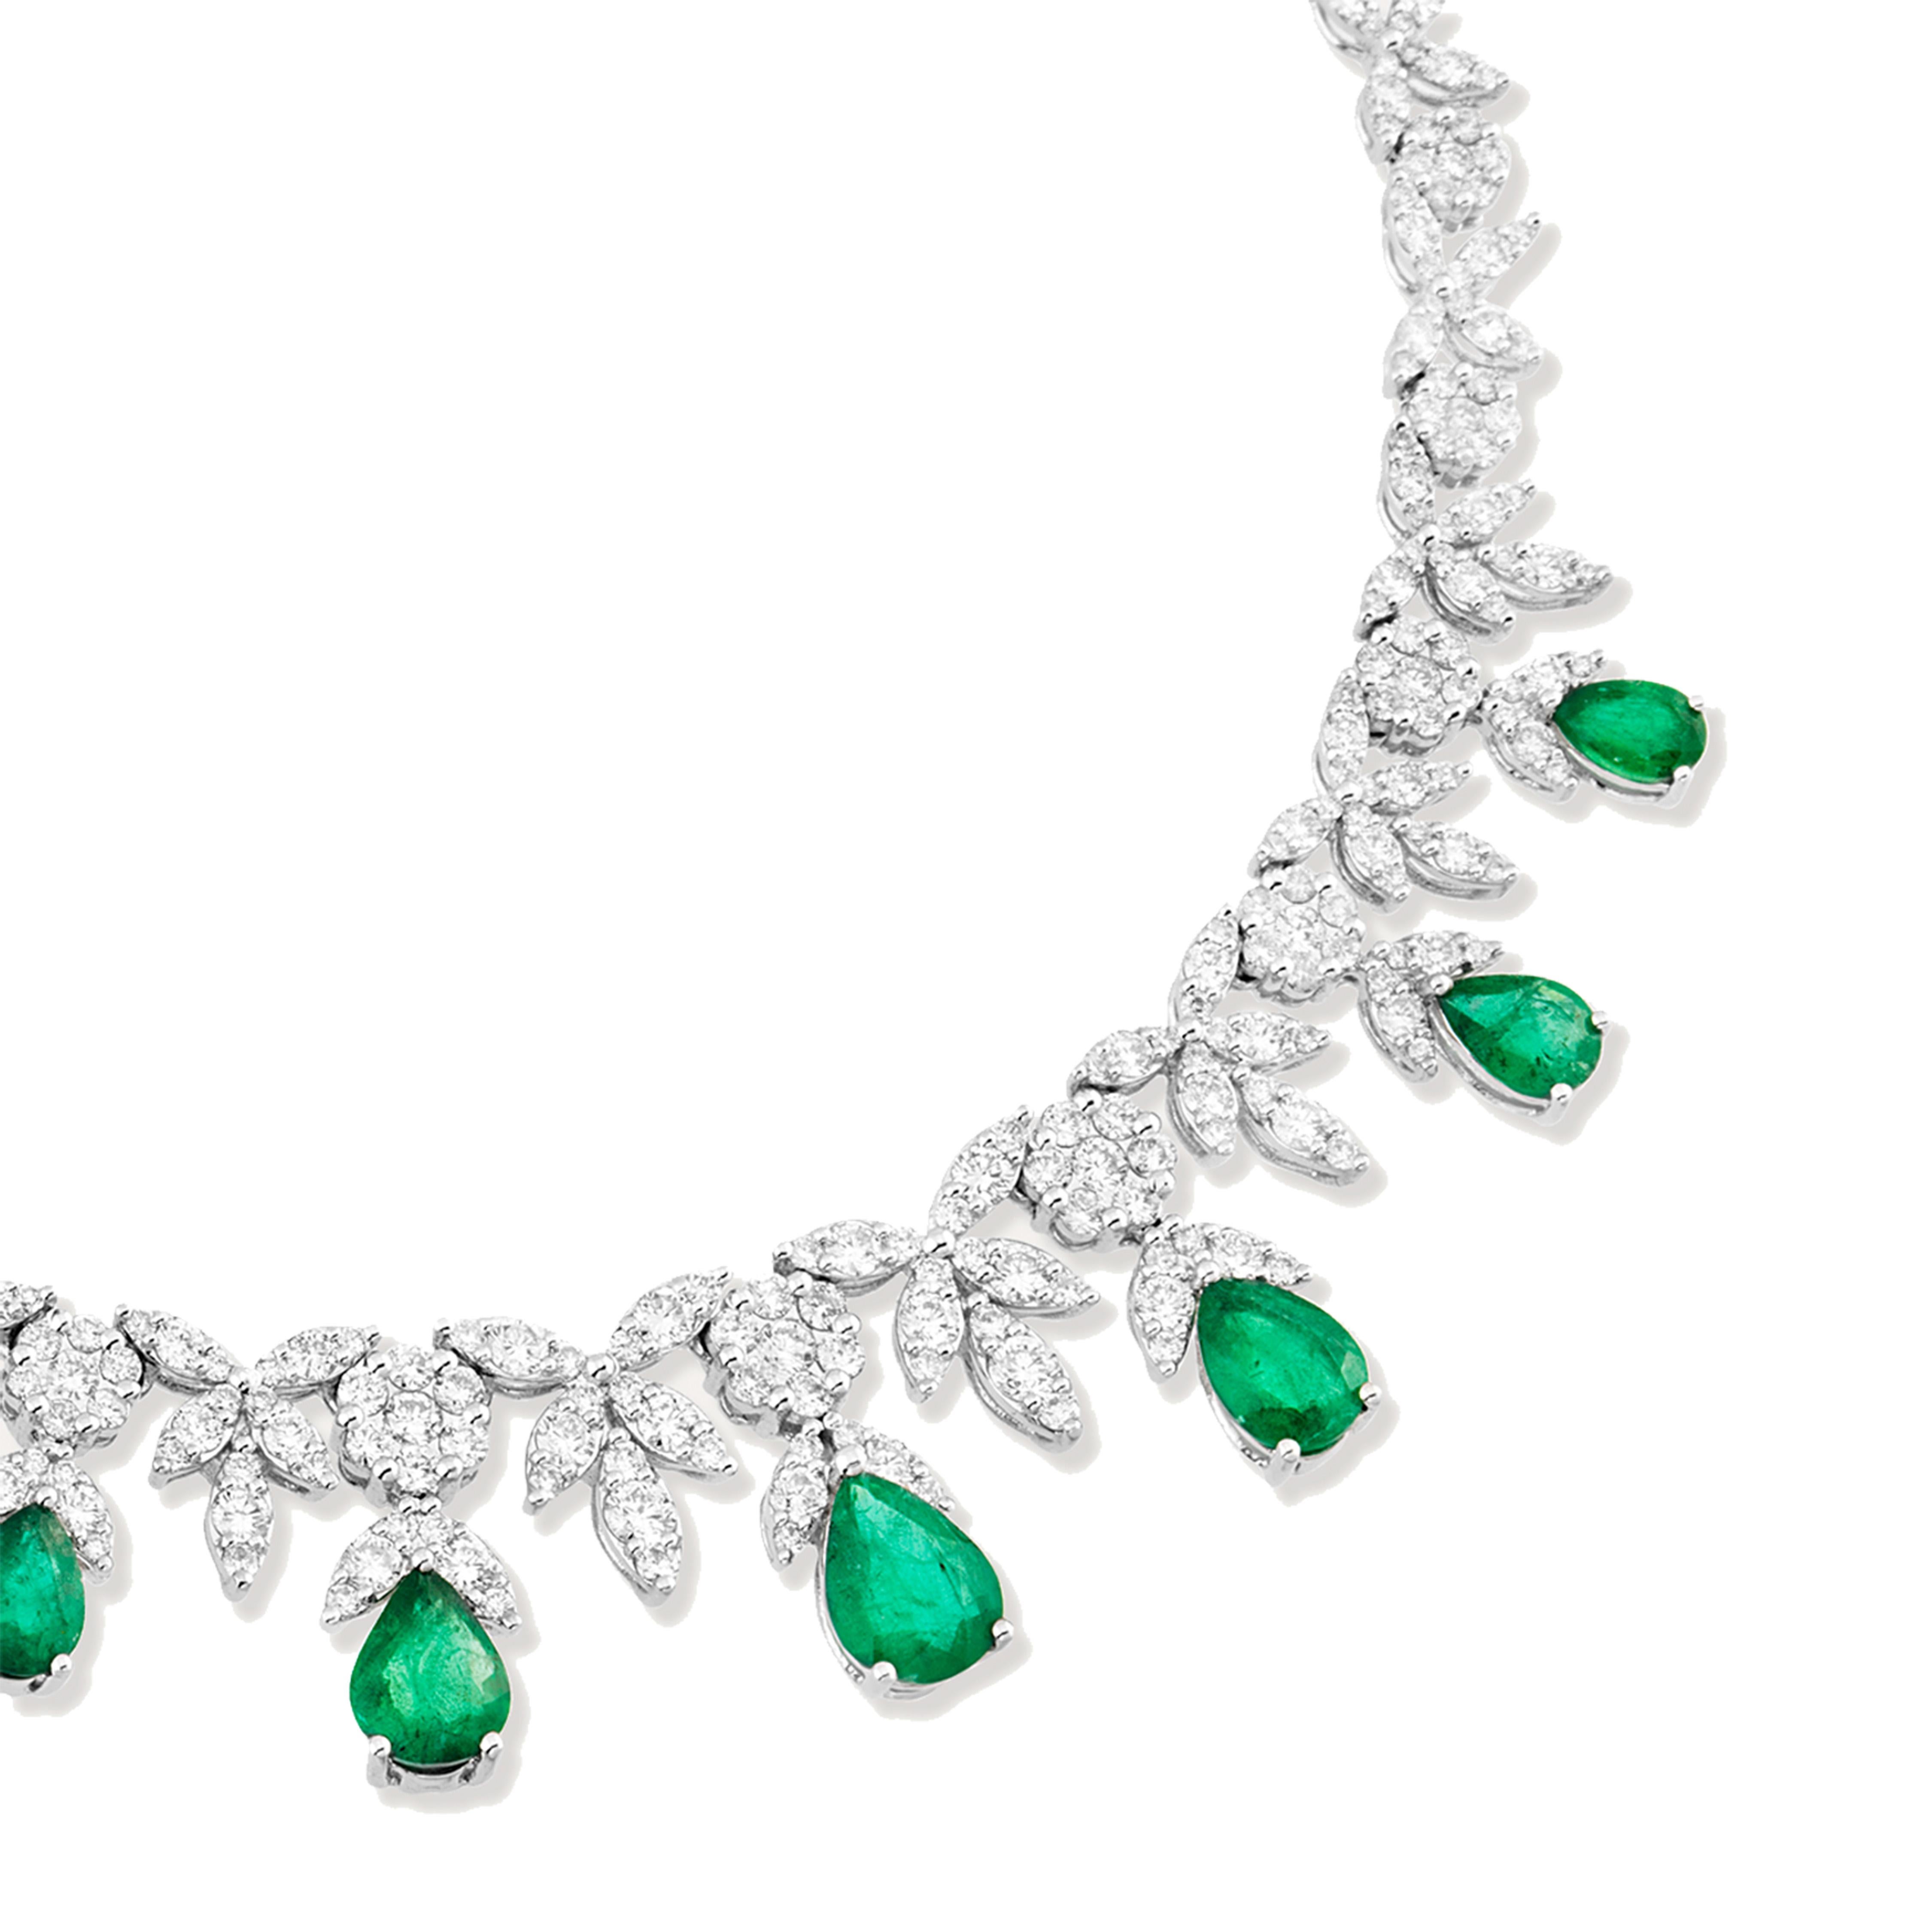 Are you looking for a unique and stunning piece of jewelry that will make you stand out from the crowd? Then look no further than this gorgeous emerald and diamond necklace! 
This necklace features 9.95 carats of beautiful, vivid green emeralds,